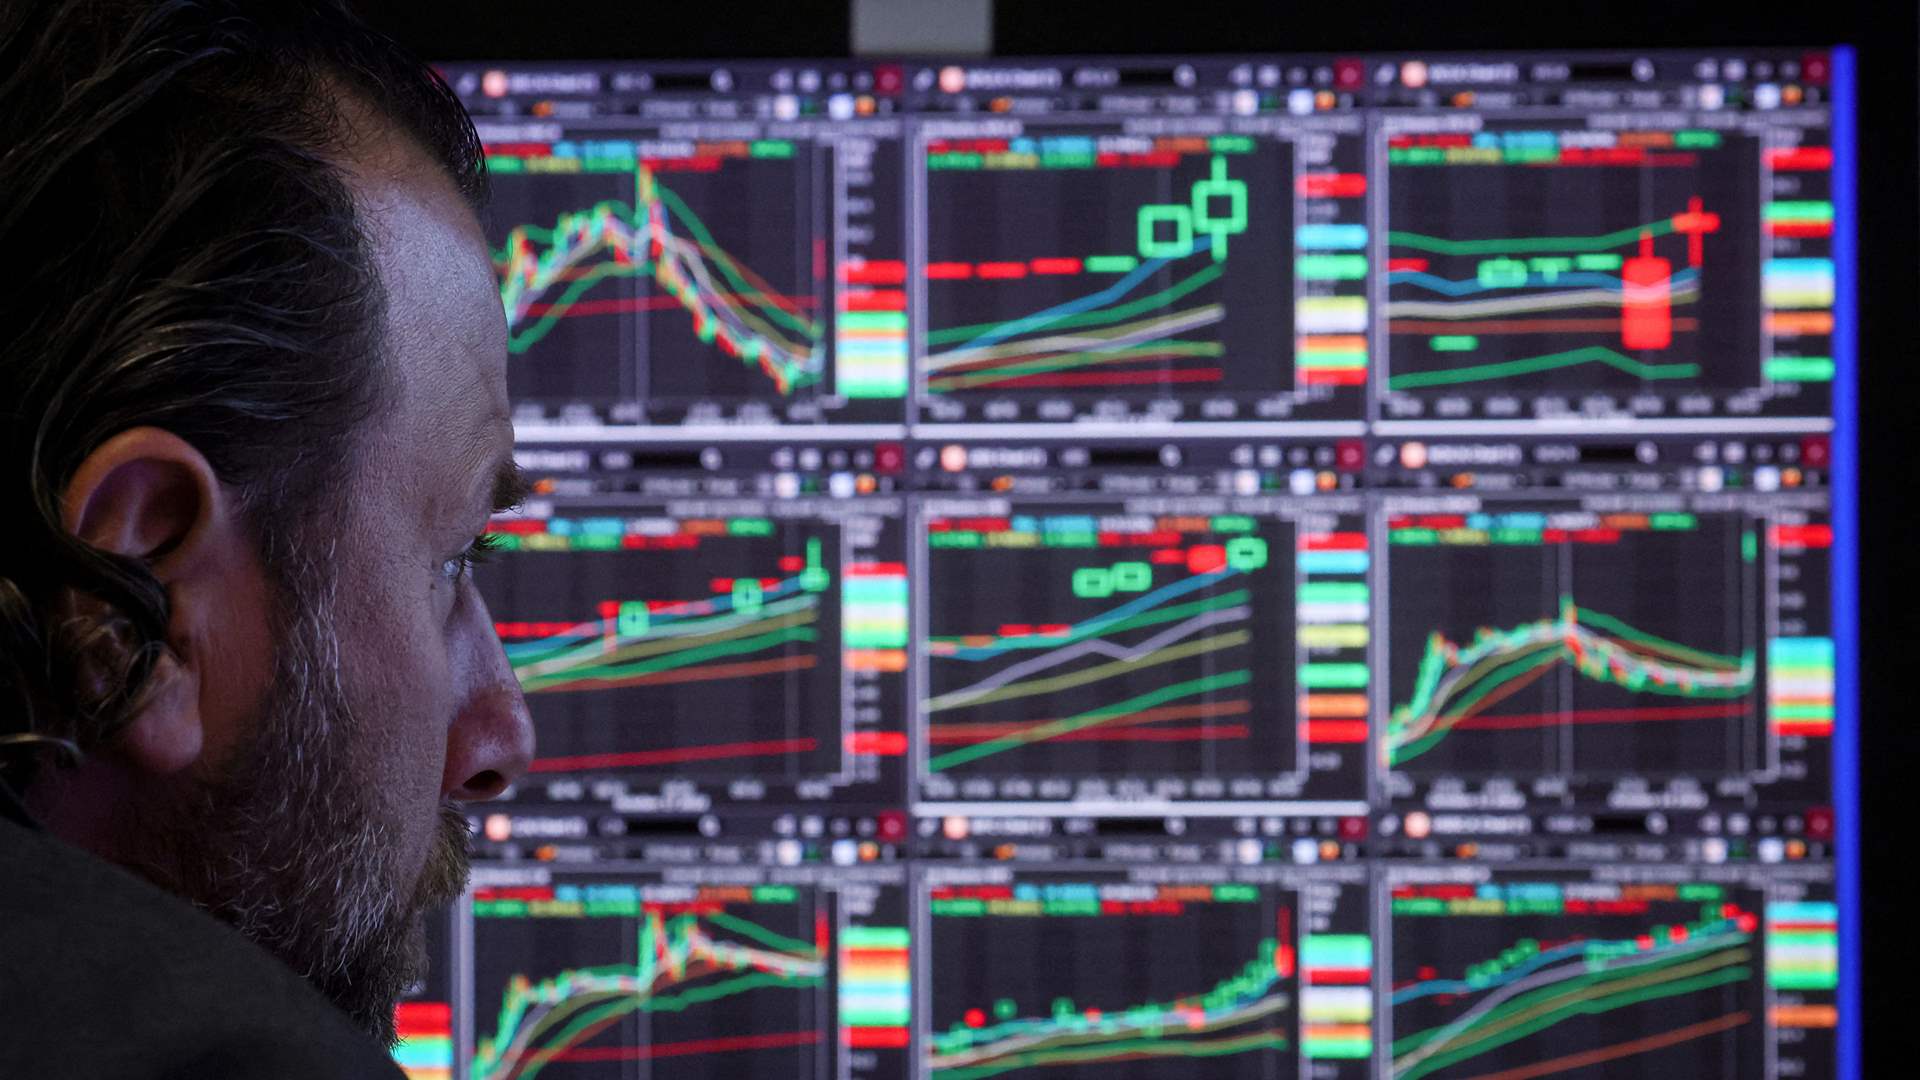 Profiting from conflict: Examining stock market activity before Hamas&#39; plan on Israel